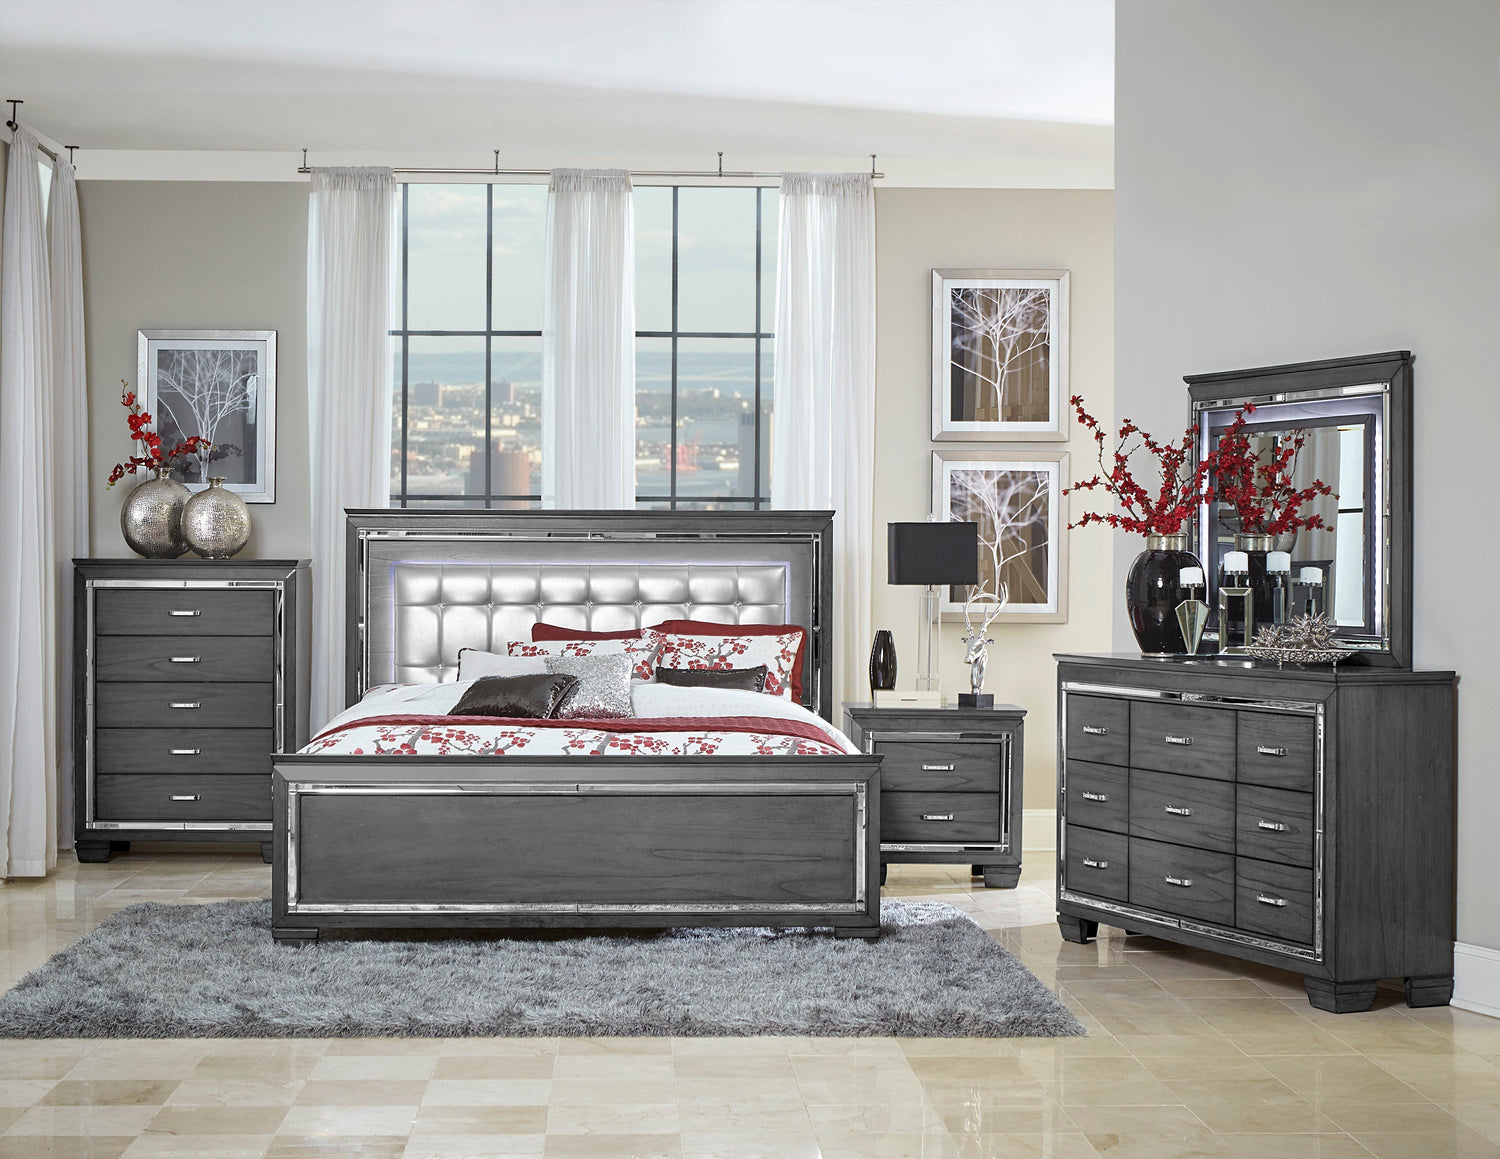 Allura Gray LED Upholstered Panel Bedroom Set - SET | 1916GY-1 | 1916GY-2 | 1916GY-3 | 1916GY-5 | 1916GY-6 | 1916GY-4 - Bien Home Furniture &amp; Electronics